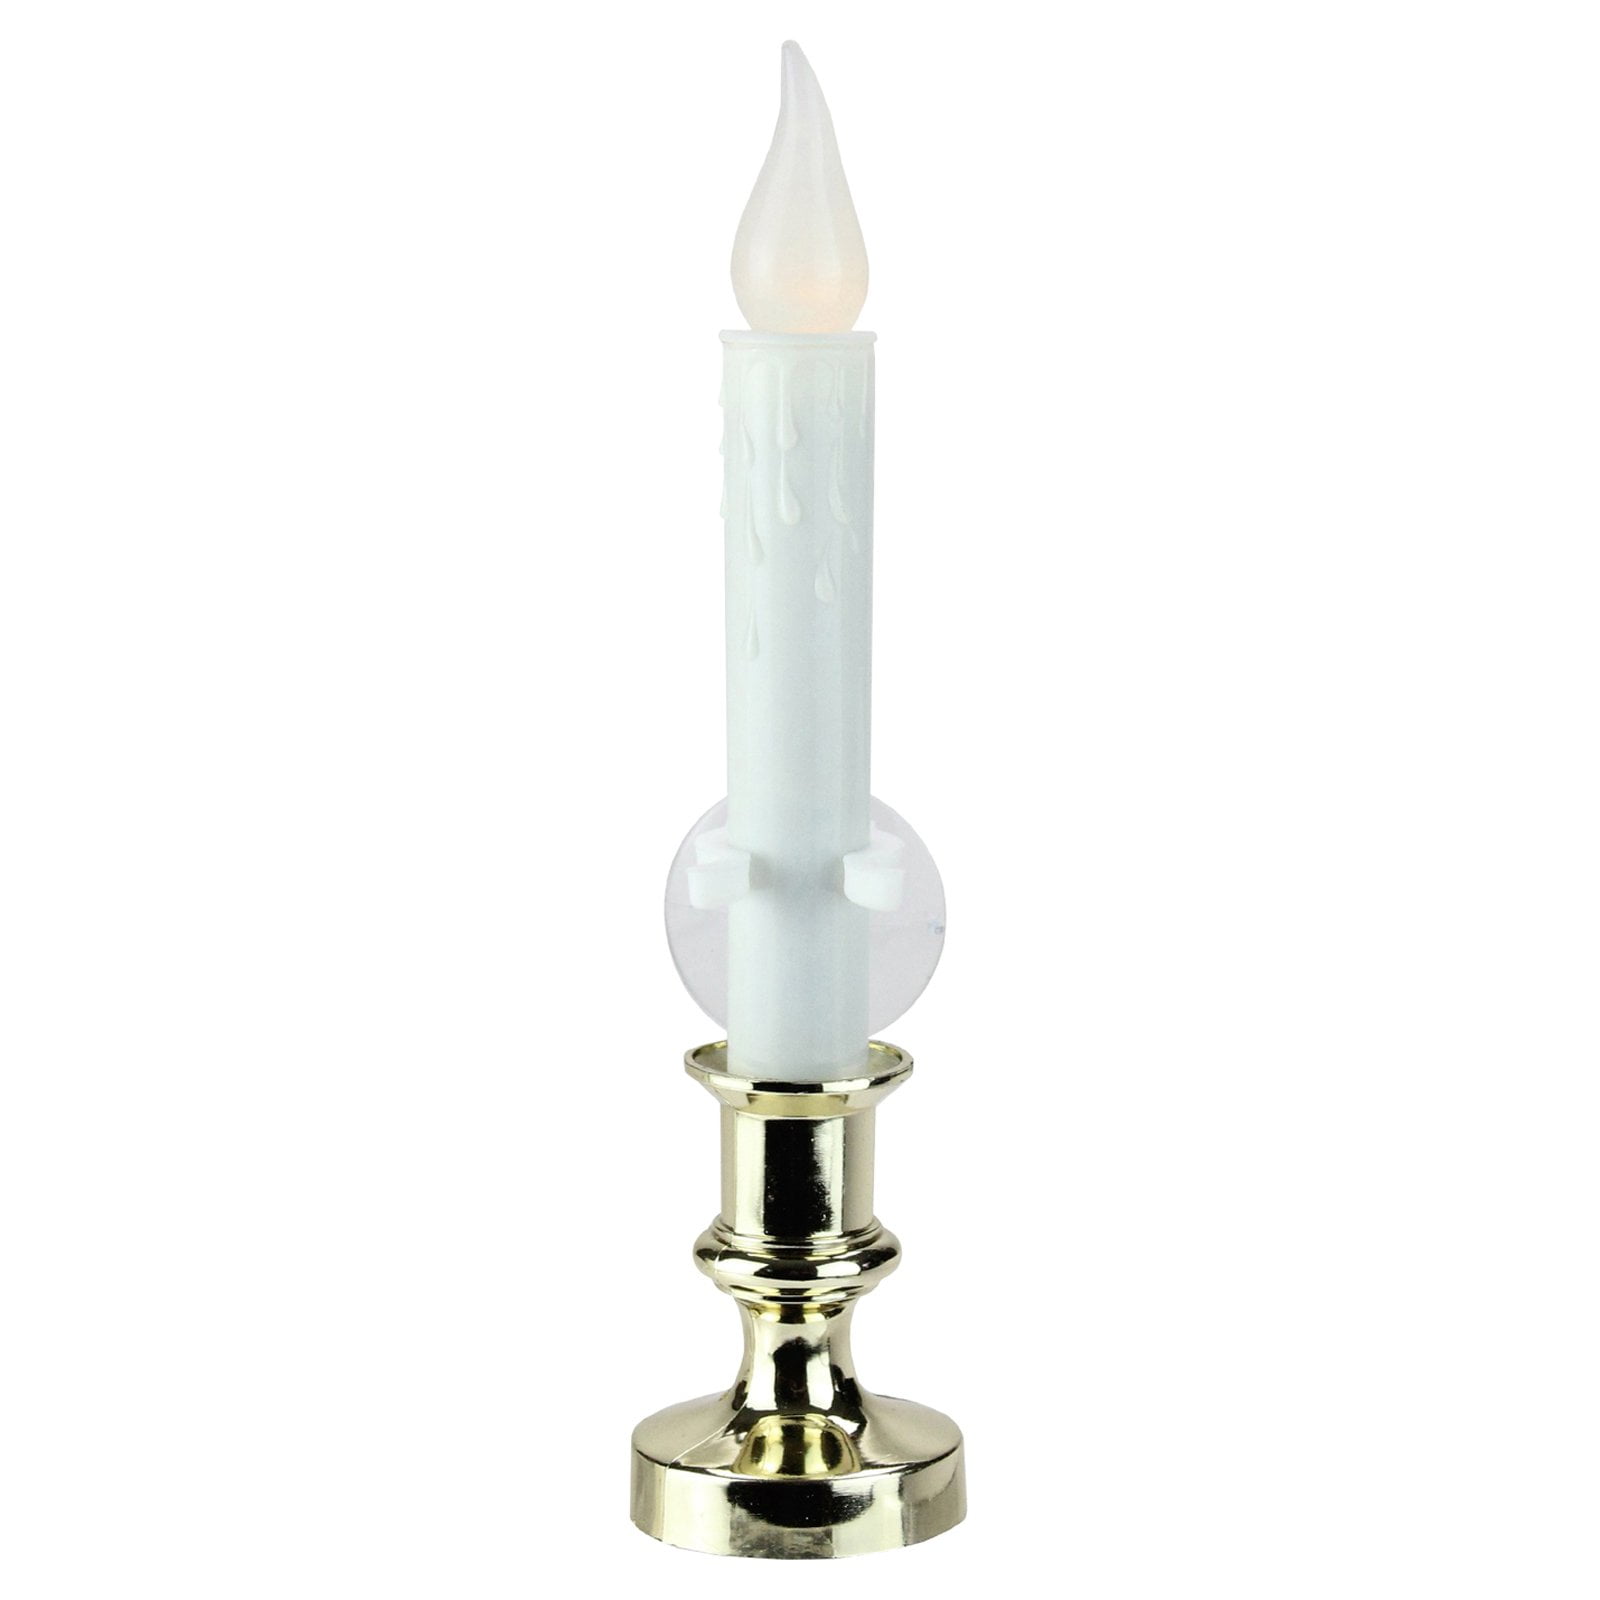 Darice 6204-02WW Battery Operated Warm White 8-1/2 LED Window Candle w/ Timer Quantity 8 